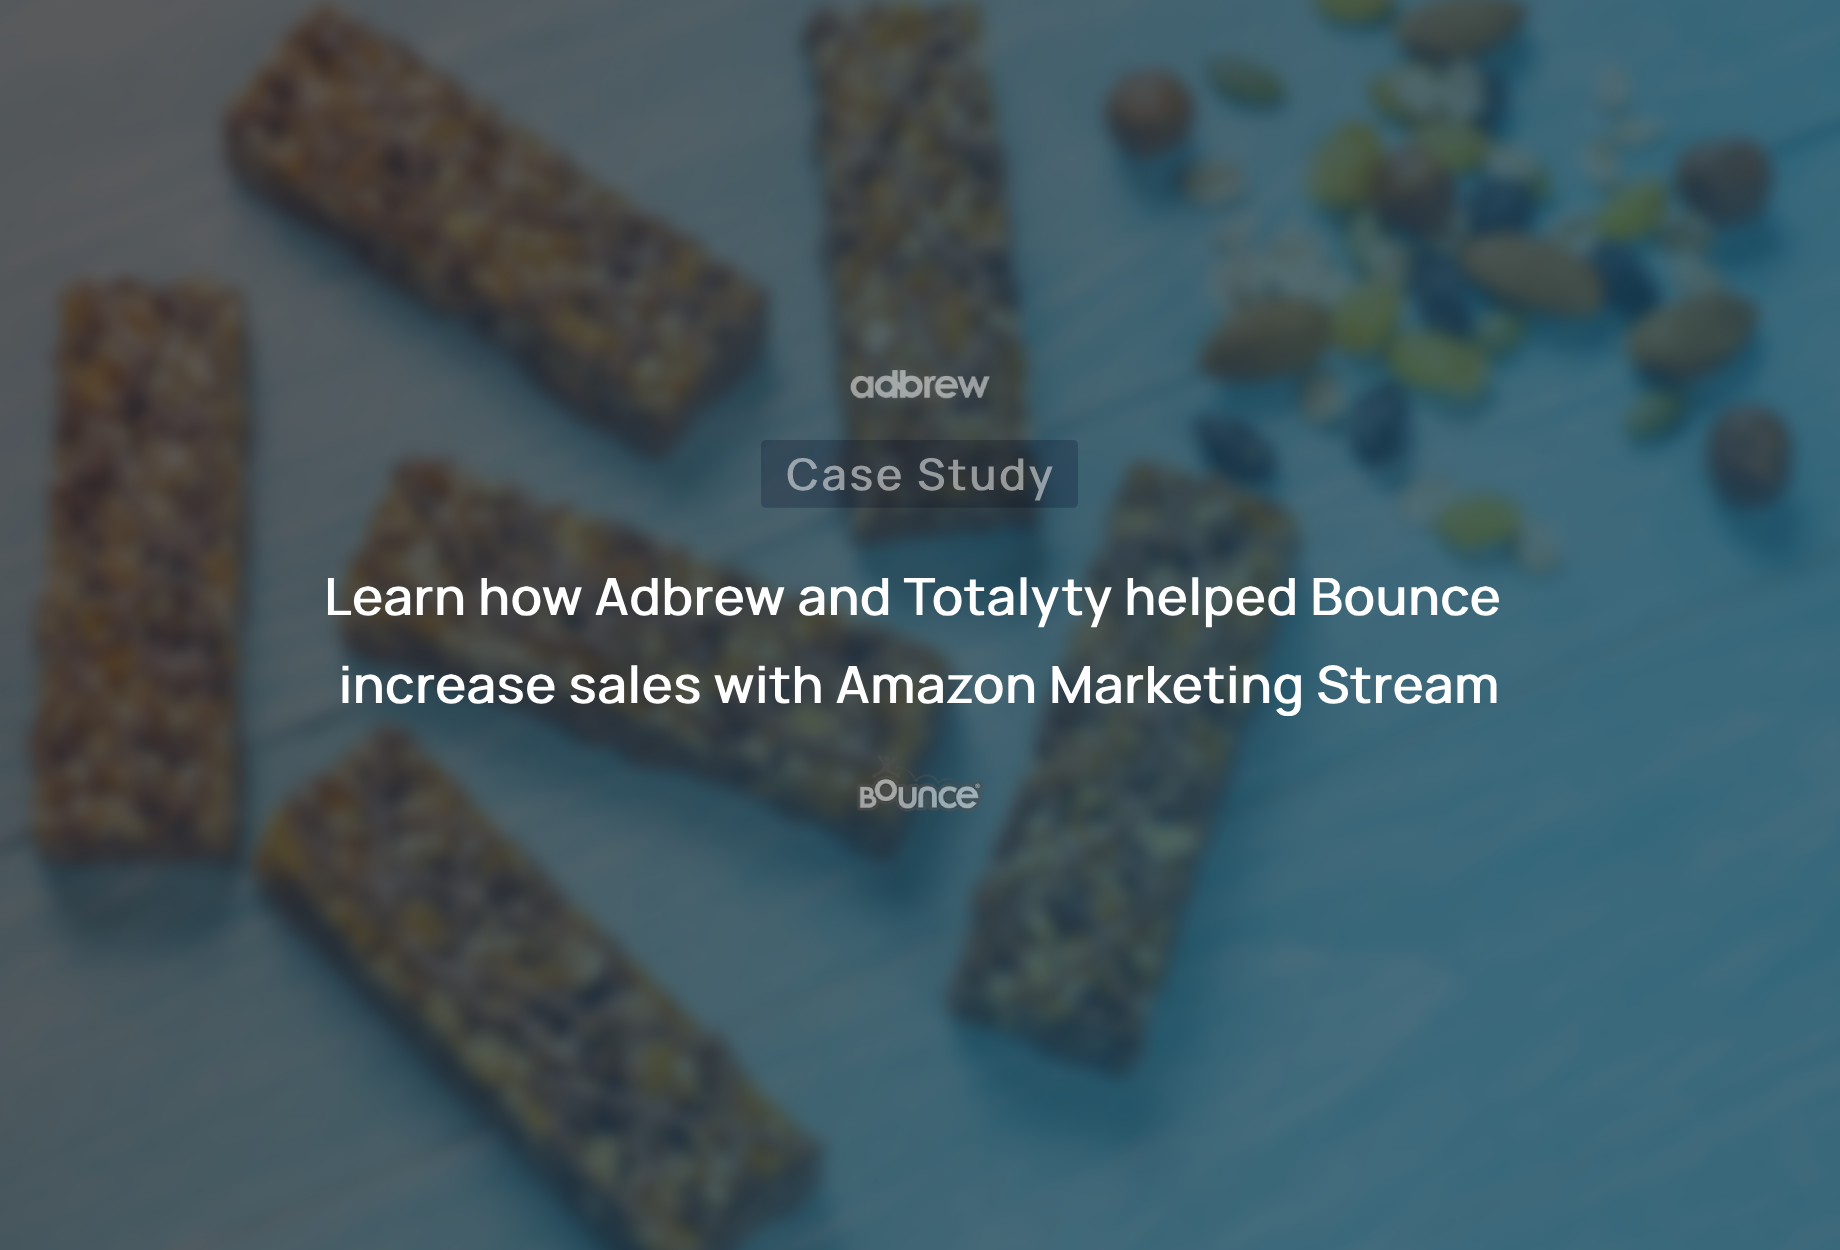 Learn how Adbrew and Totalyty helped Bounce increase sales with Amazon Marketing Stream